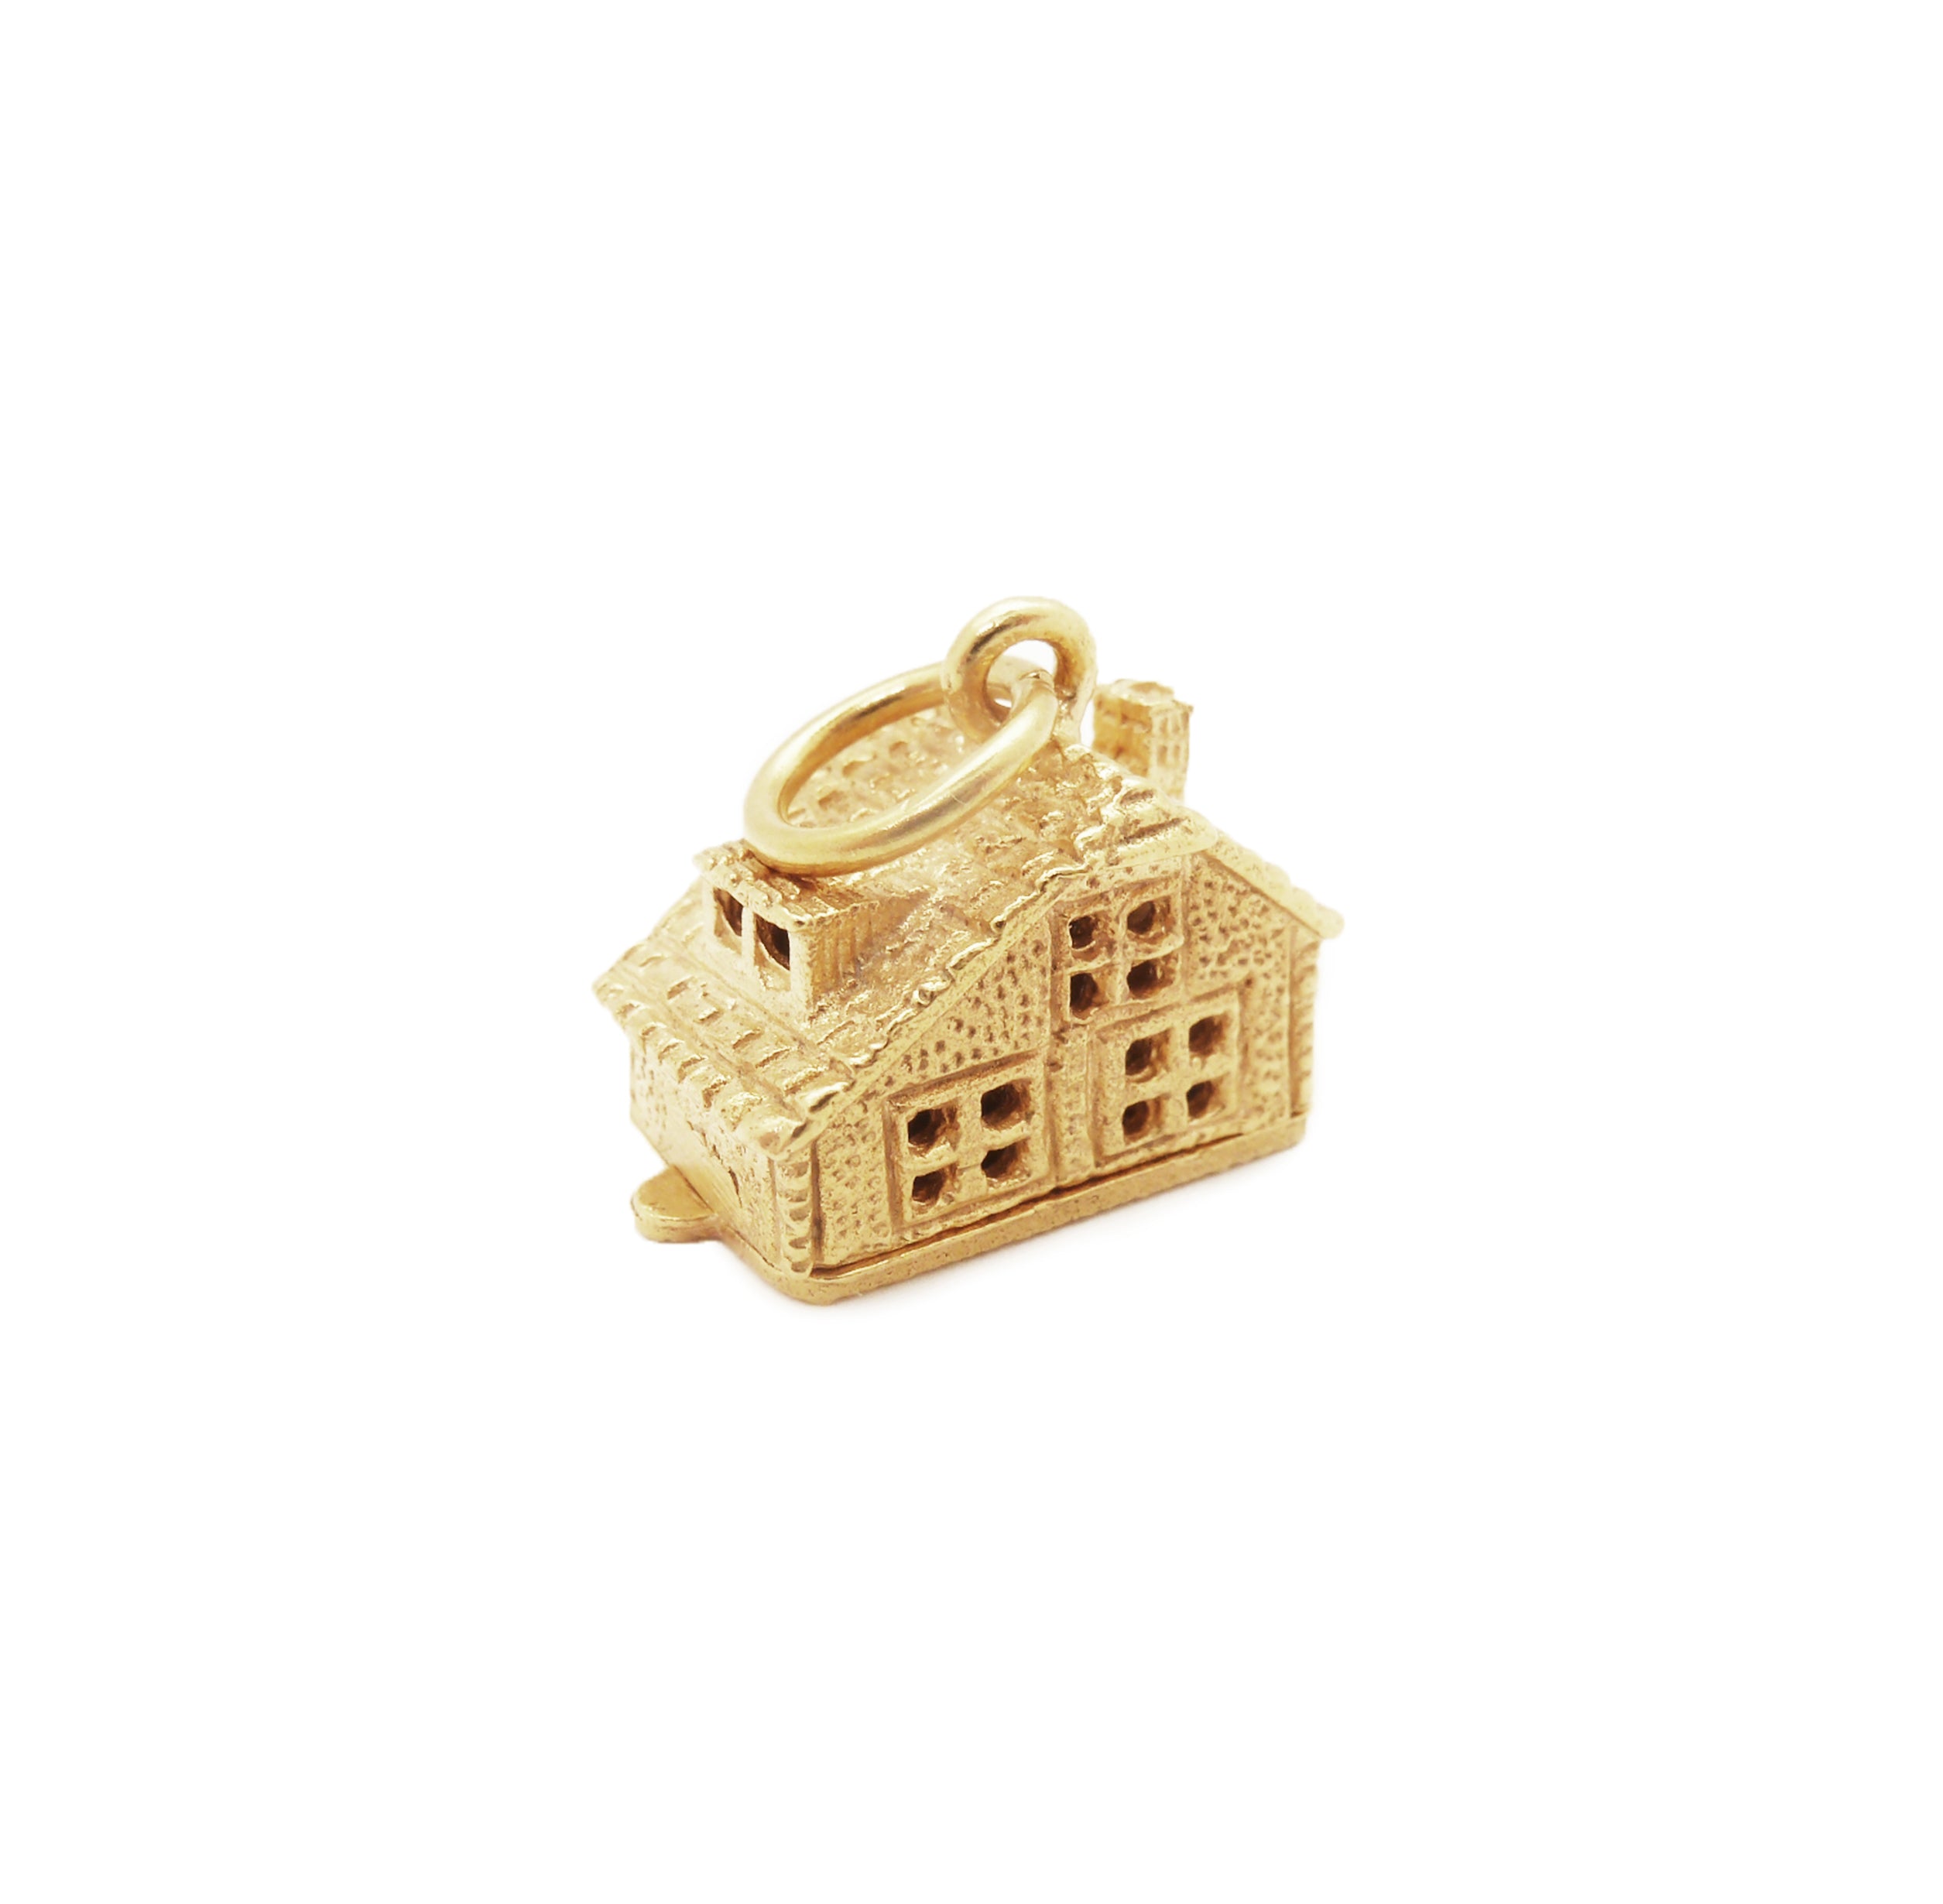 Articulated House Charm - Mirabelle Jewellery